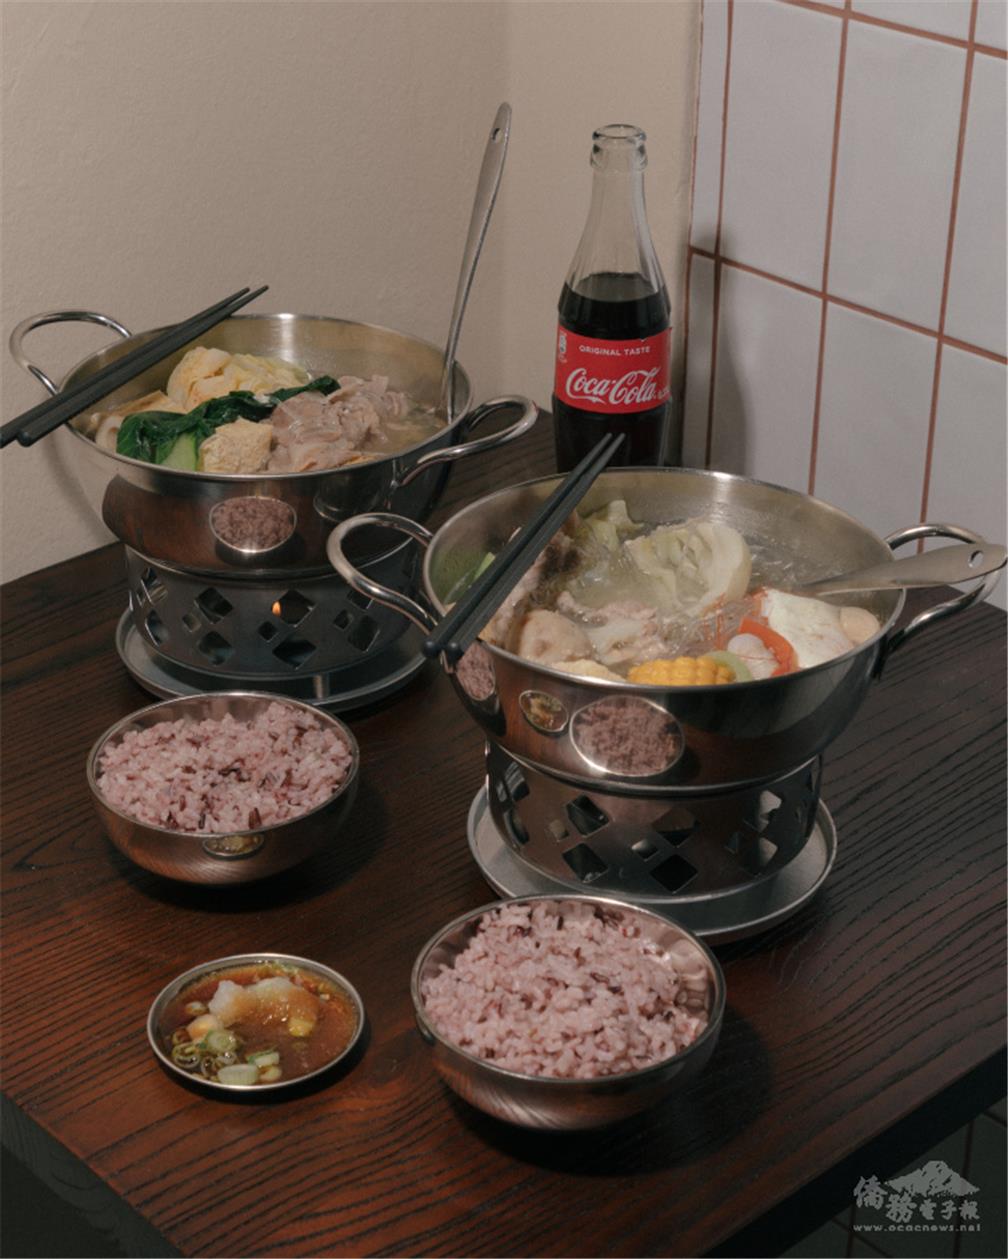 The restaurant's regular dish, the hotpot, with its soup recipe and ingredients exported from Taiwan. 